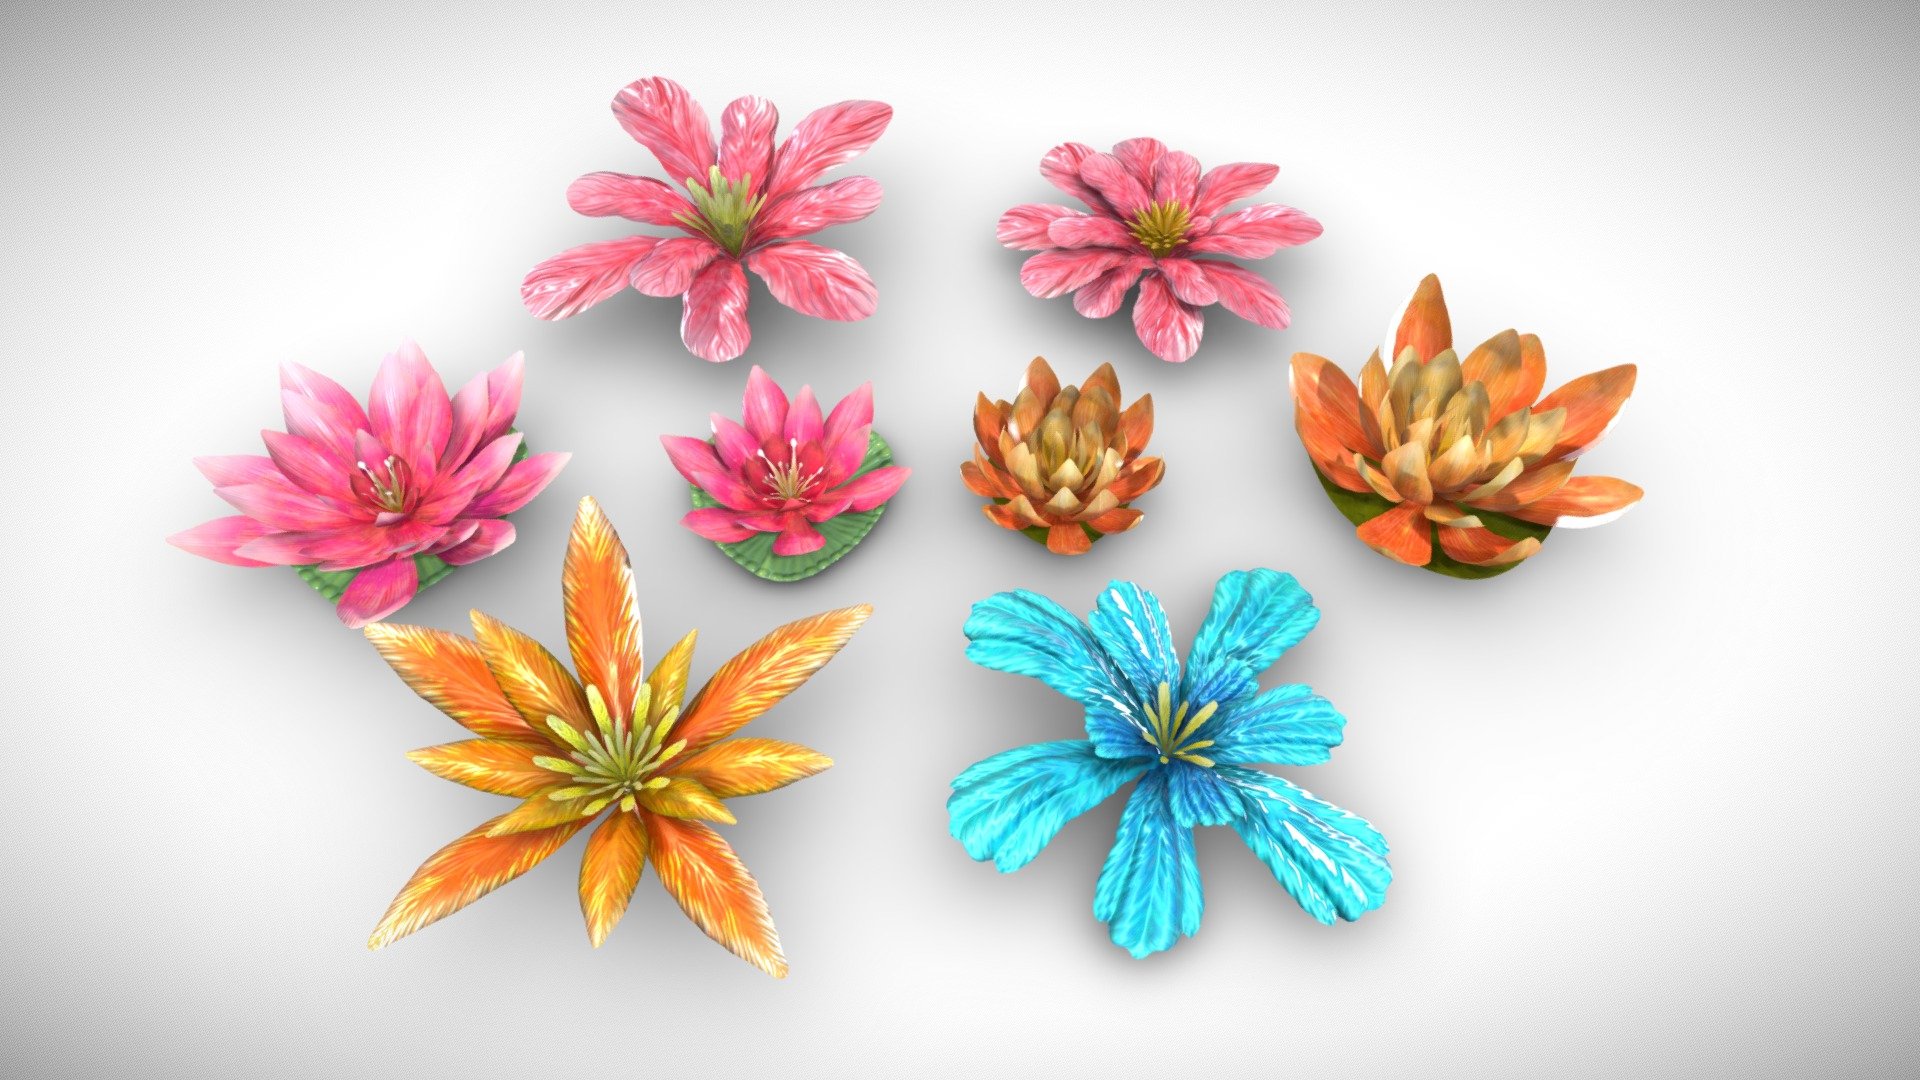 This meshes contain 3 UV Maps with 4096x4096 textures, and are optimized for videogames.
The meshes have been cut around transparency to reduce overdraw of the opacity channel.
Lotus A, Lotus B, and 4 flowers have their own UV Textures, respectively.

Textures are the following:
- Diffuse
- Roughness
- Normal Map
- Opacity

Seperate FBX Files are included upon purchase - Alien Fantasy Flowers - Lotus and Petals - 4k - Buy Royalty Free 3D model by Davis3D 3d model